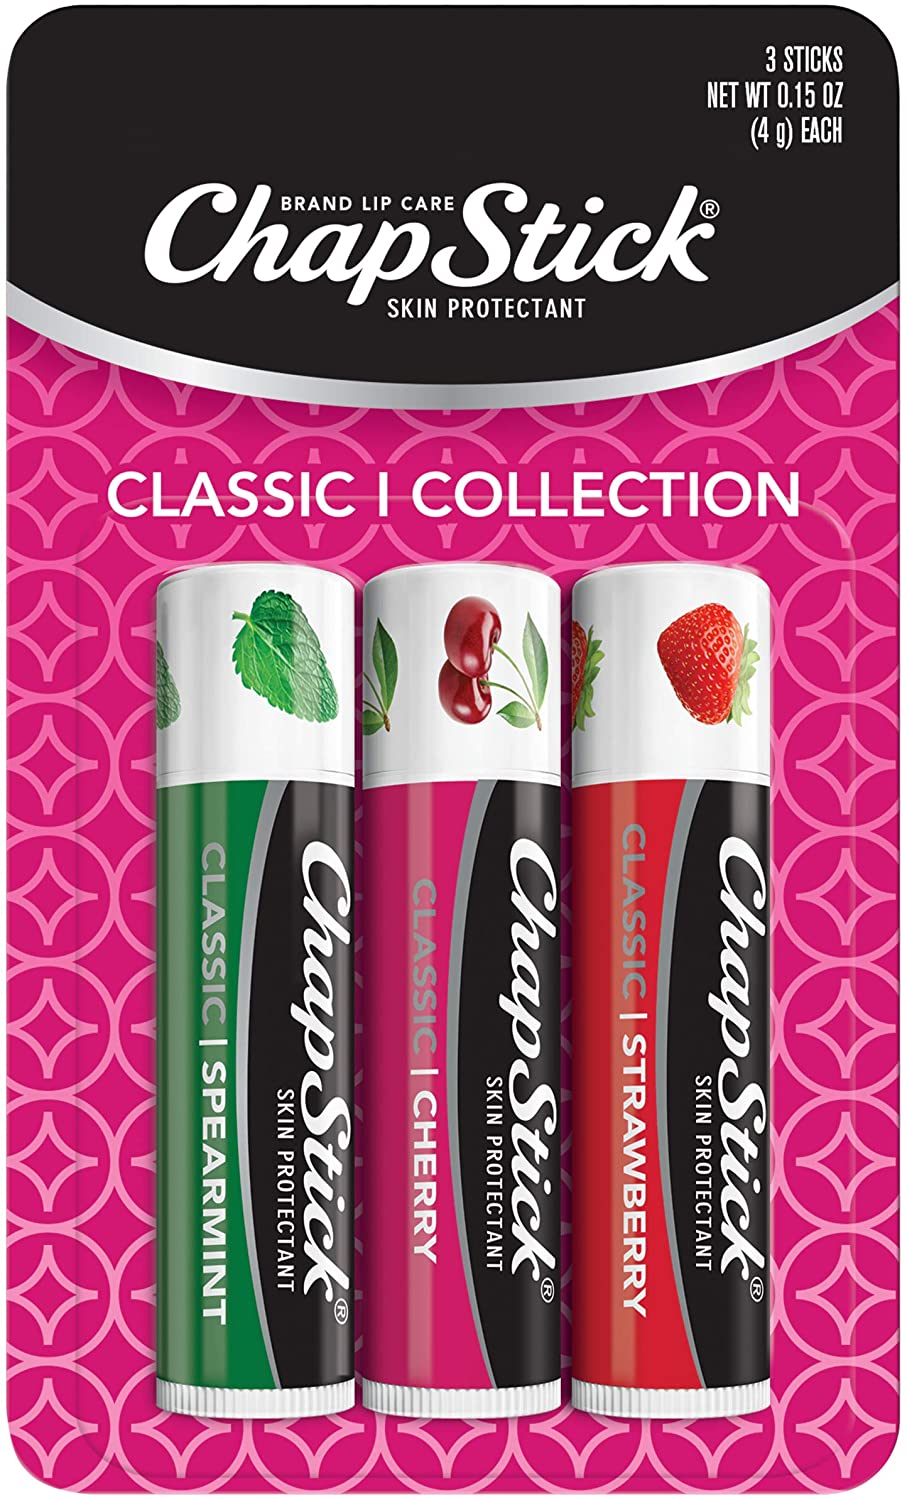 3-Count ChapStick Classic Lip Balm Tubes Variety Pack (Cherry/Strawberry/Spearmint) $1.50 w/ S&S + Free Shipping w/ Prime or $25+